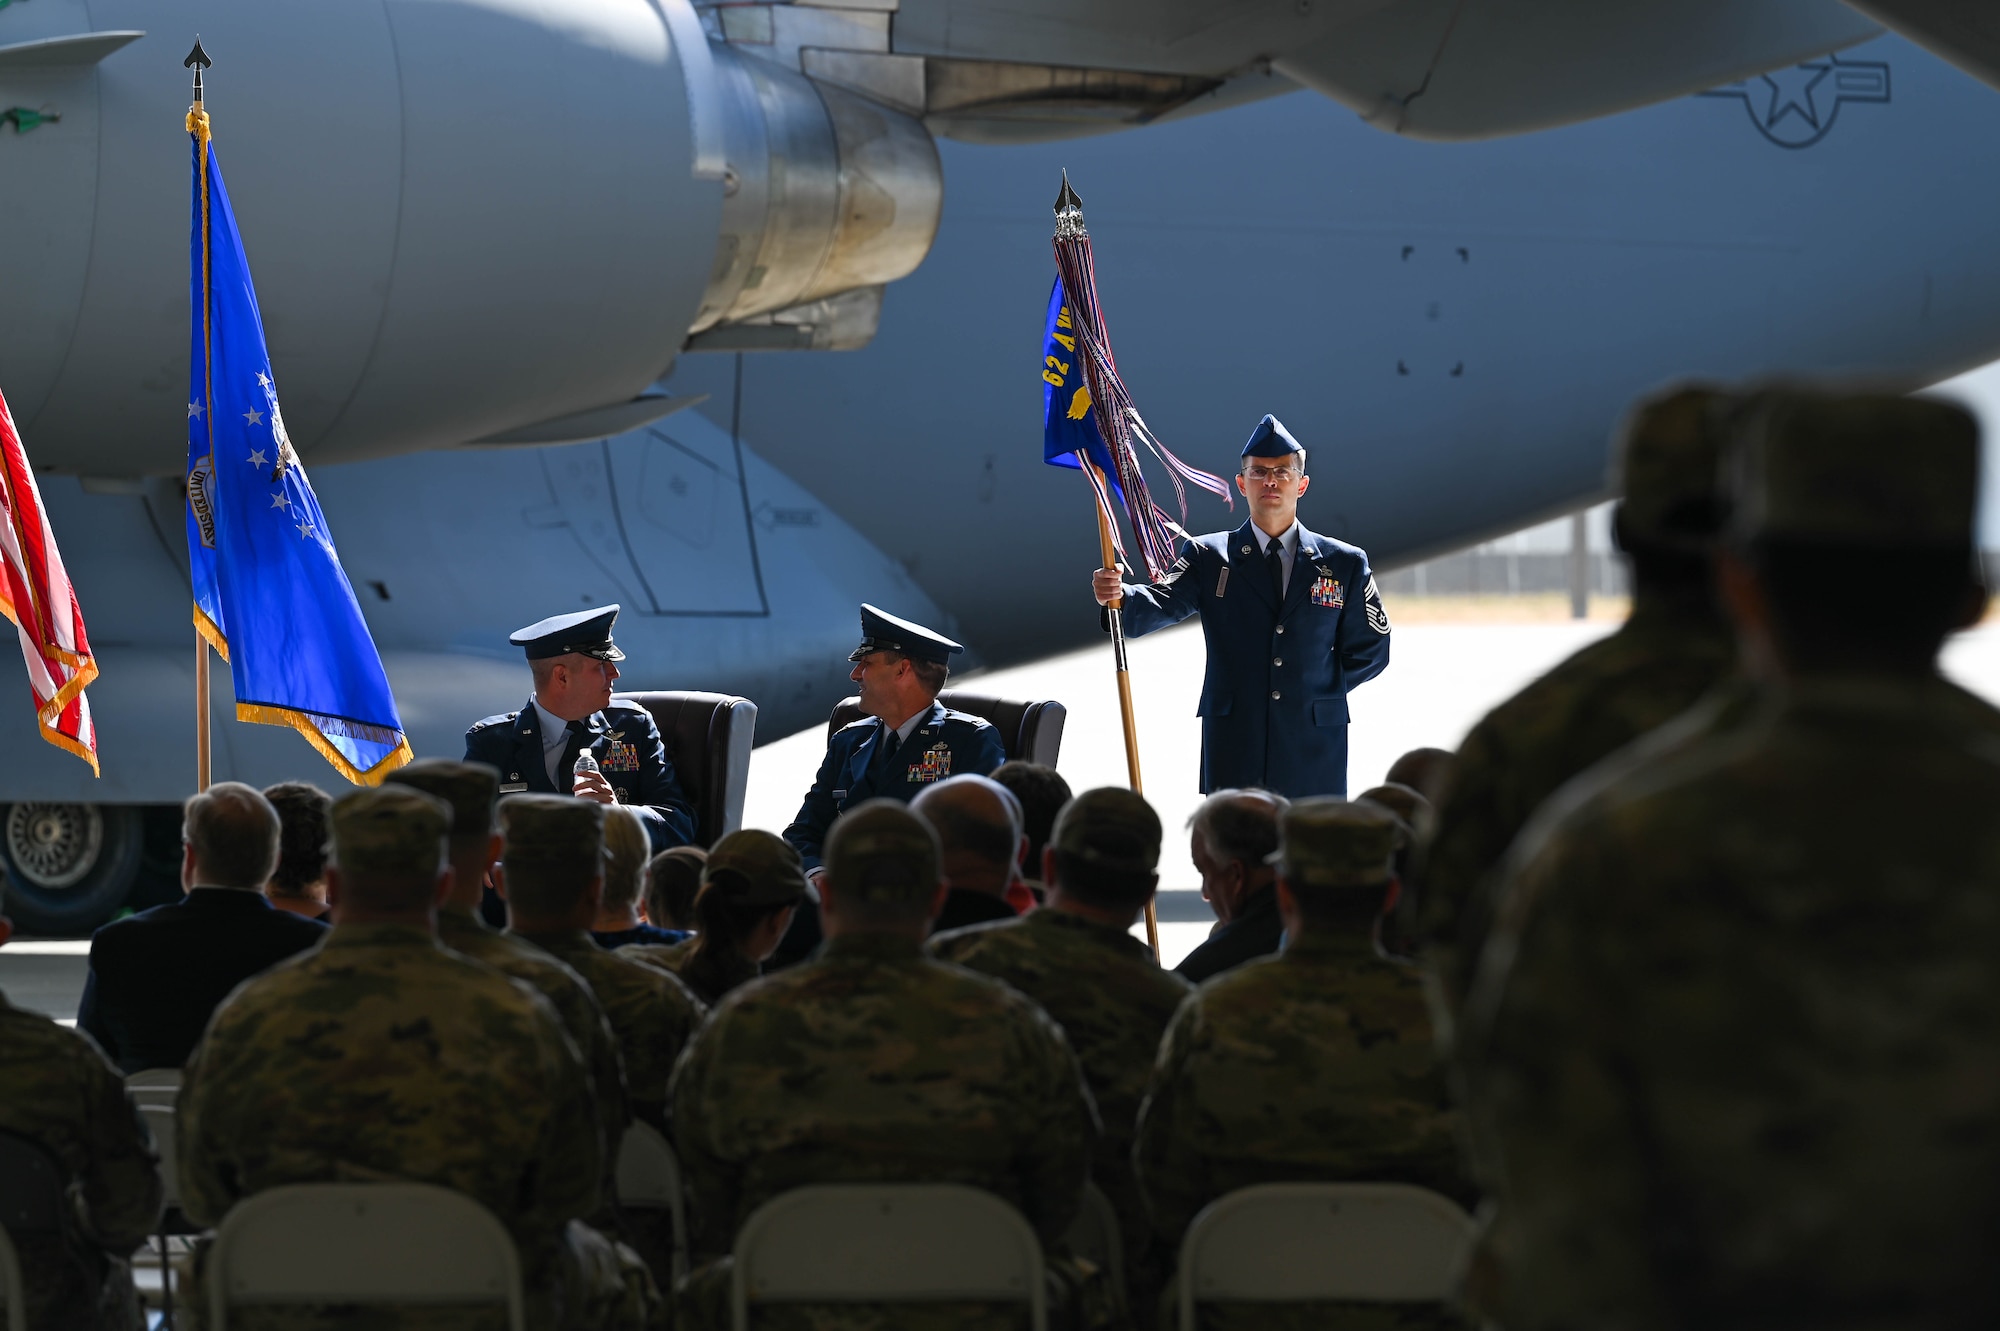 U.S. Air Force Col. David Fazenbaker, left, commander of the 62d Airlift Wing, and Col. Christopher Joyce, incoming commander of the 62d Maintenance Group, share words during an assumption of command ceremony at Joint Base Lewis-McChord, Washington, Aug. 5, 2022. The 62d MXG provides cargo, passenger, and aerial delivery for Joint Base Lewis-McChord’s power projection platform, to include operating the Air Mobility Command Passenger Terminal at Seattle-Tacoma International Airport. (U.S. Air Force photo by Airman 1st Colleen Anthony)